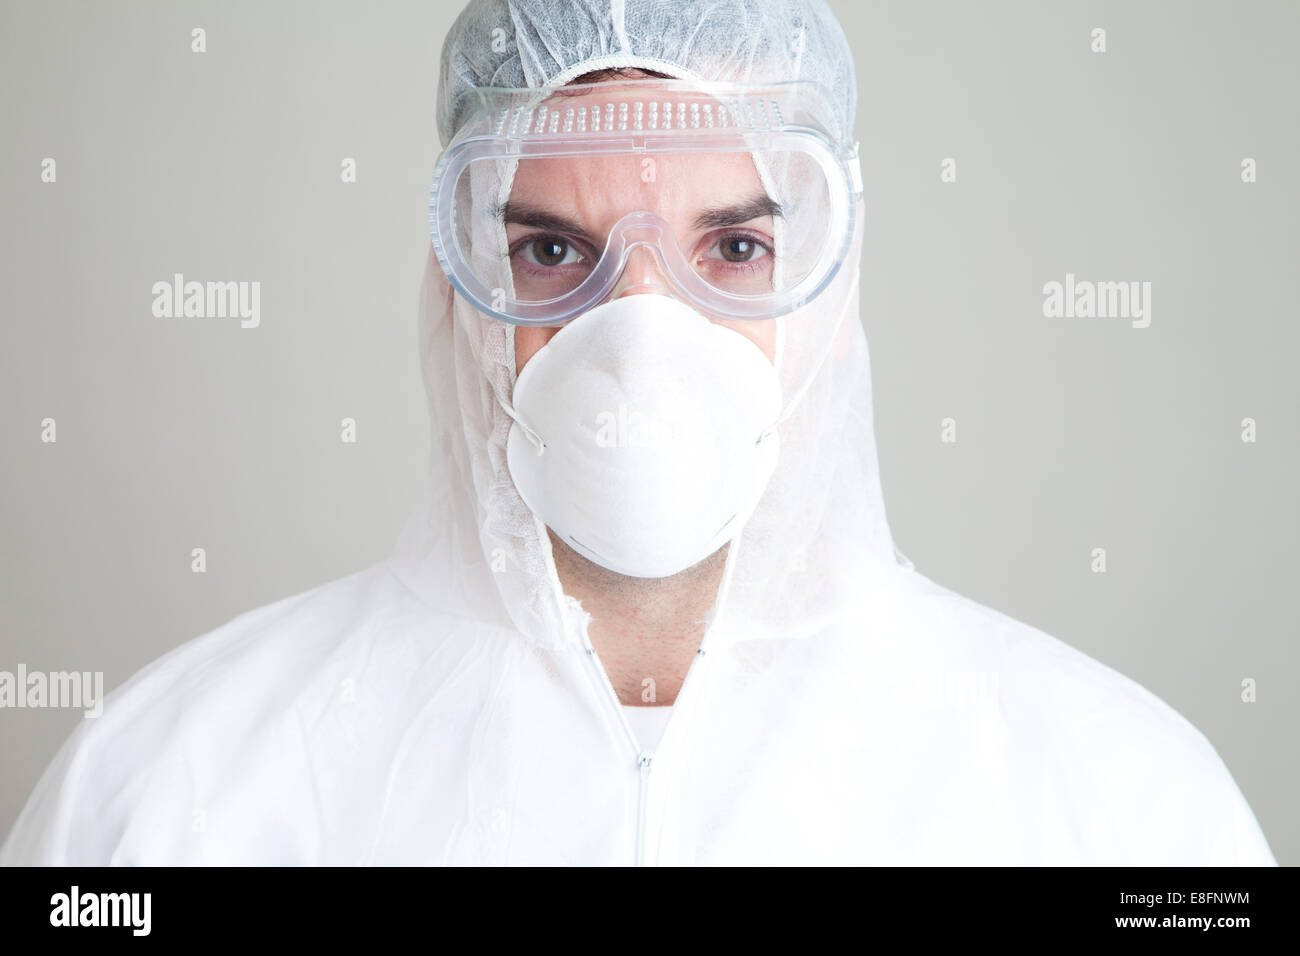 Portrait of a Man wearing protective clothing Stock Photo